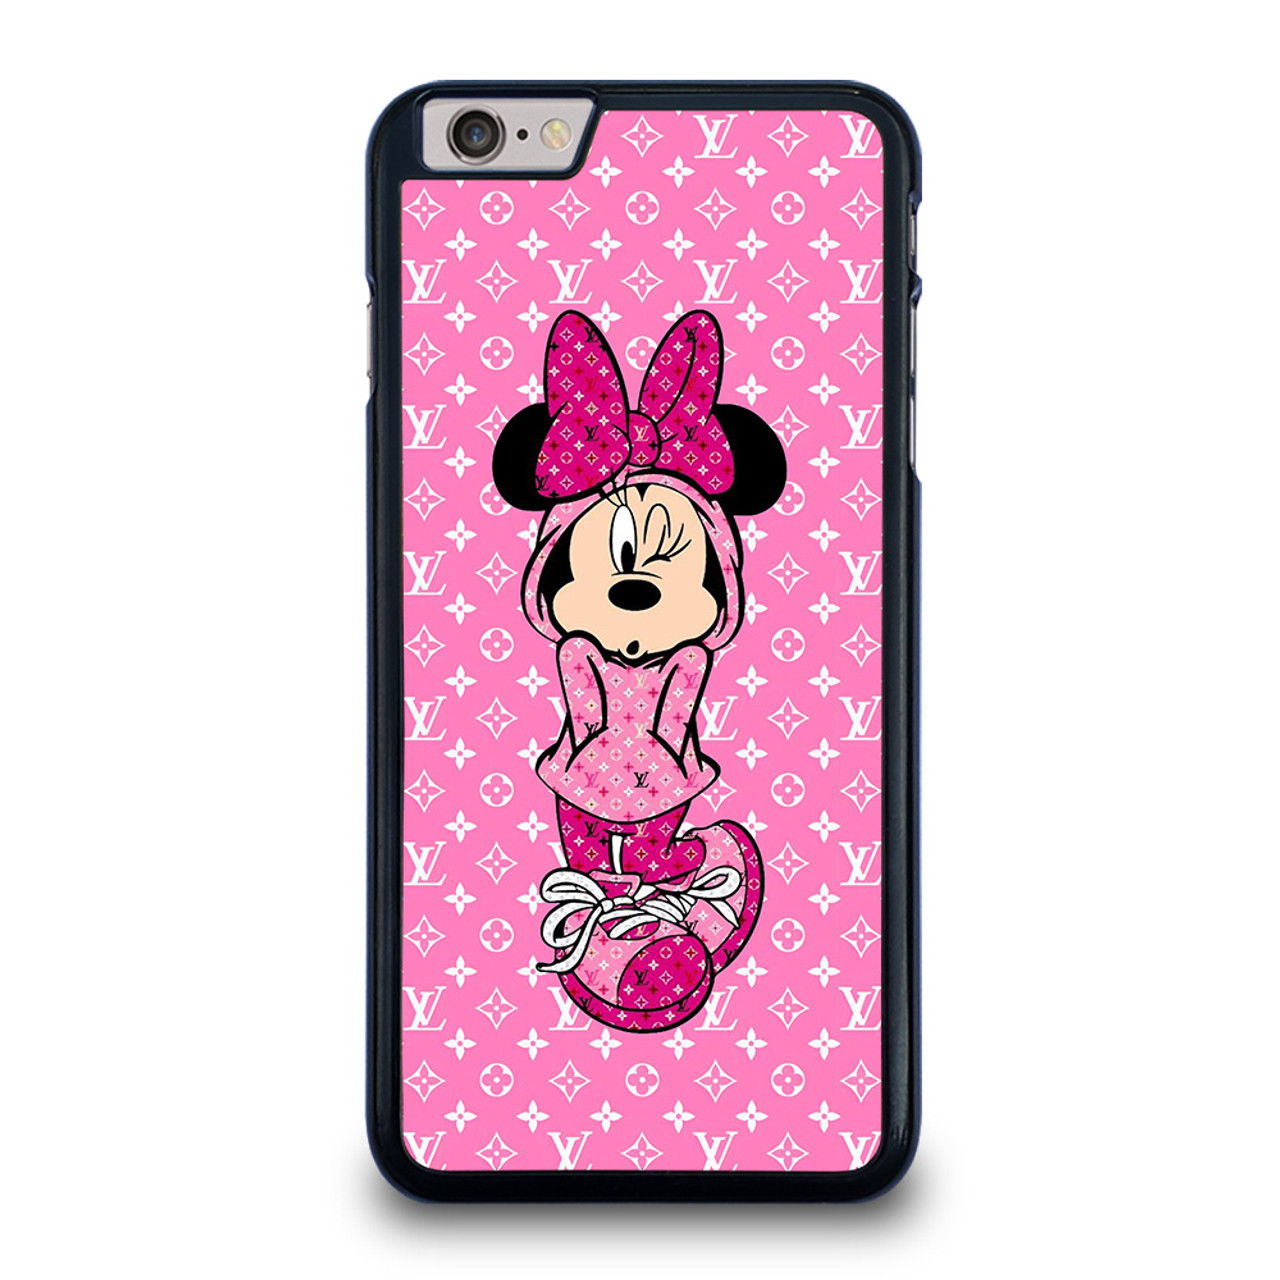 LOUIS VUITTON LV LOGO PINK MINNIE MOUSE iPhone 6 / 6S